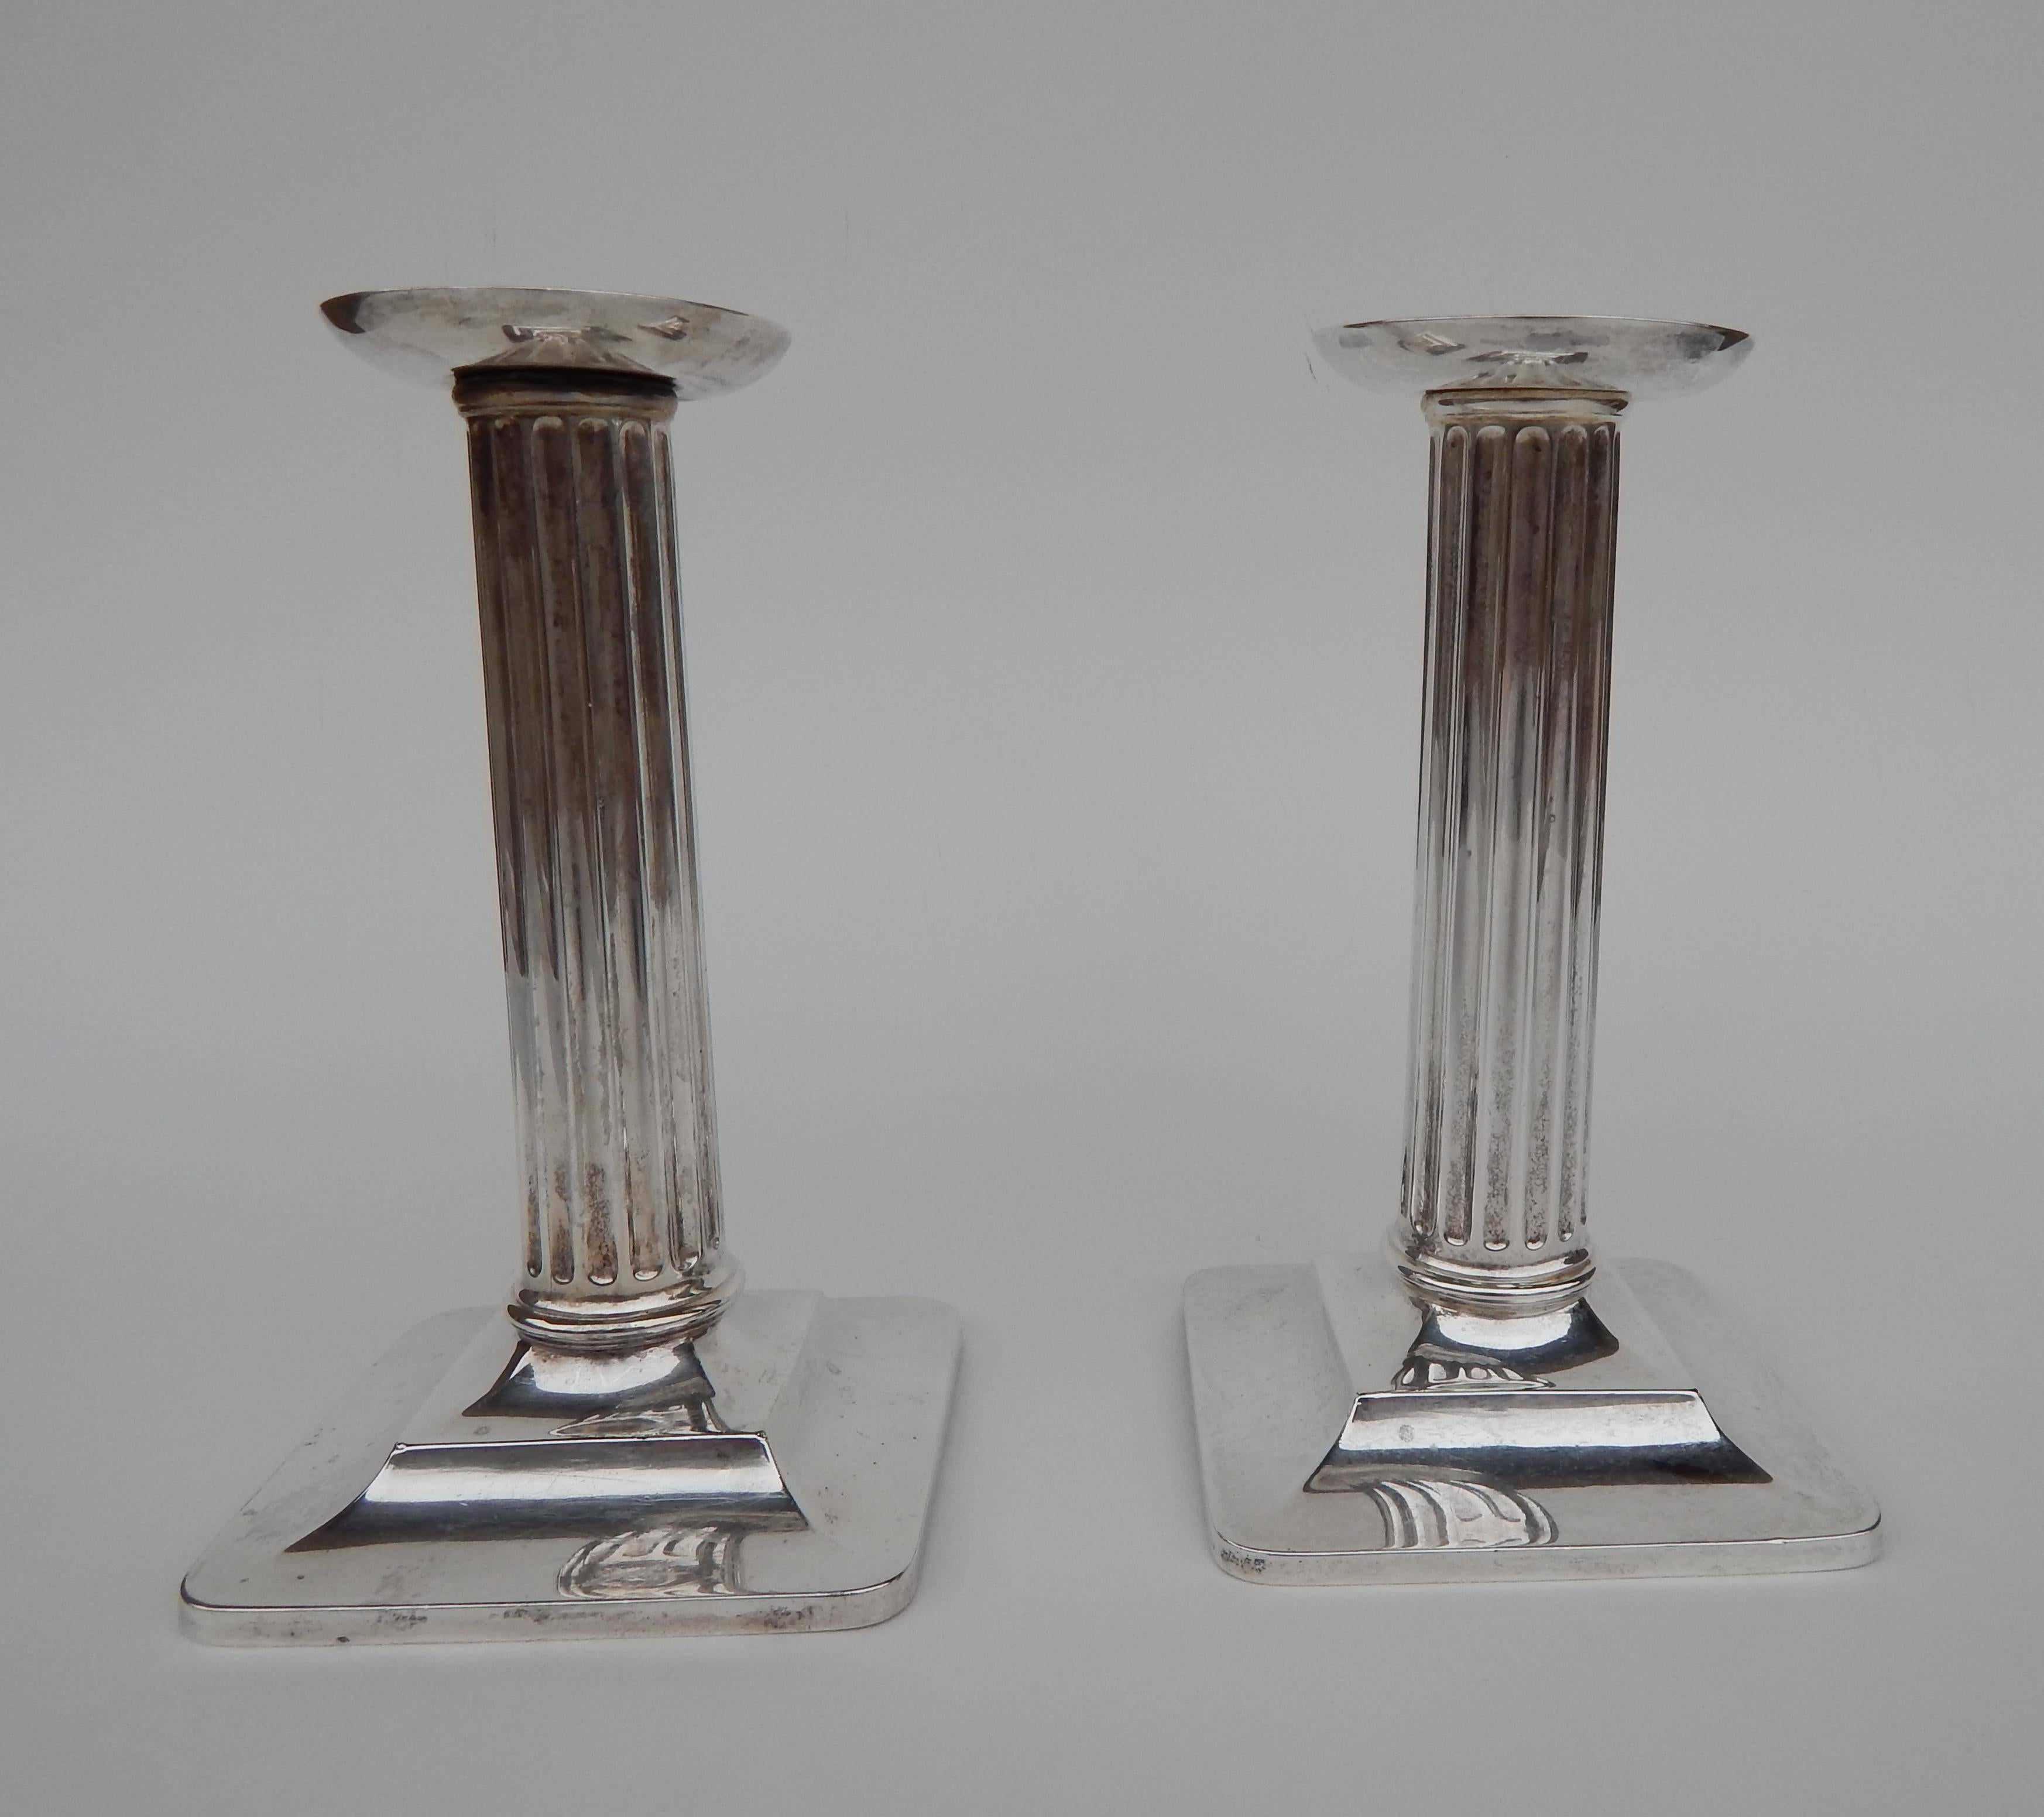 Beautiful sterling Tiffany candlesticks in excellent condition.
Measures: 6.75